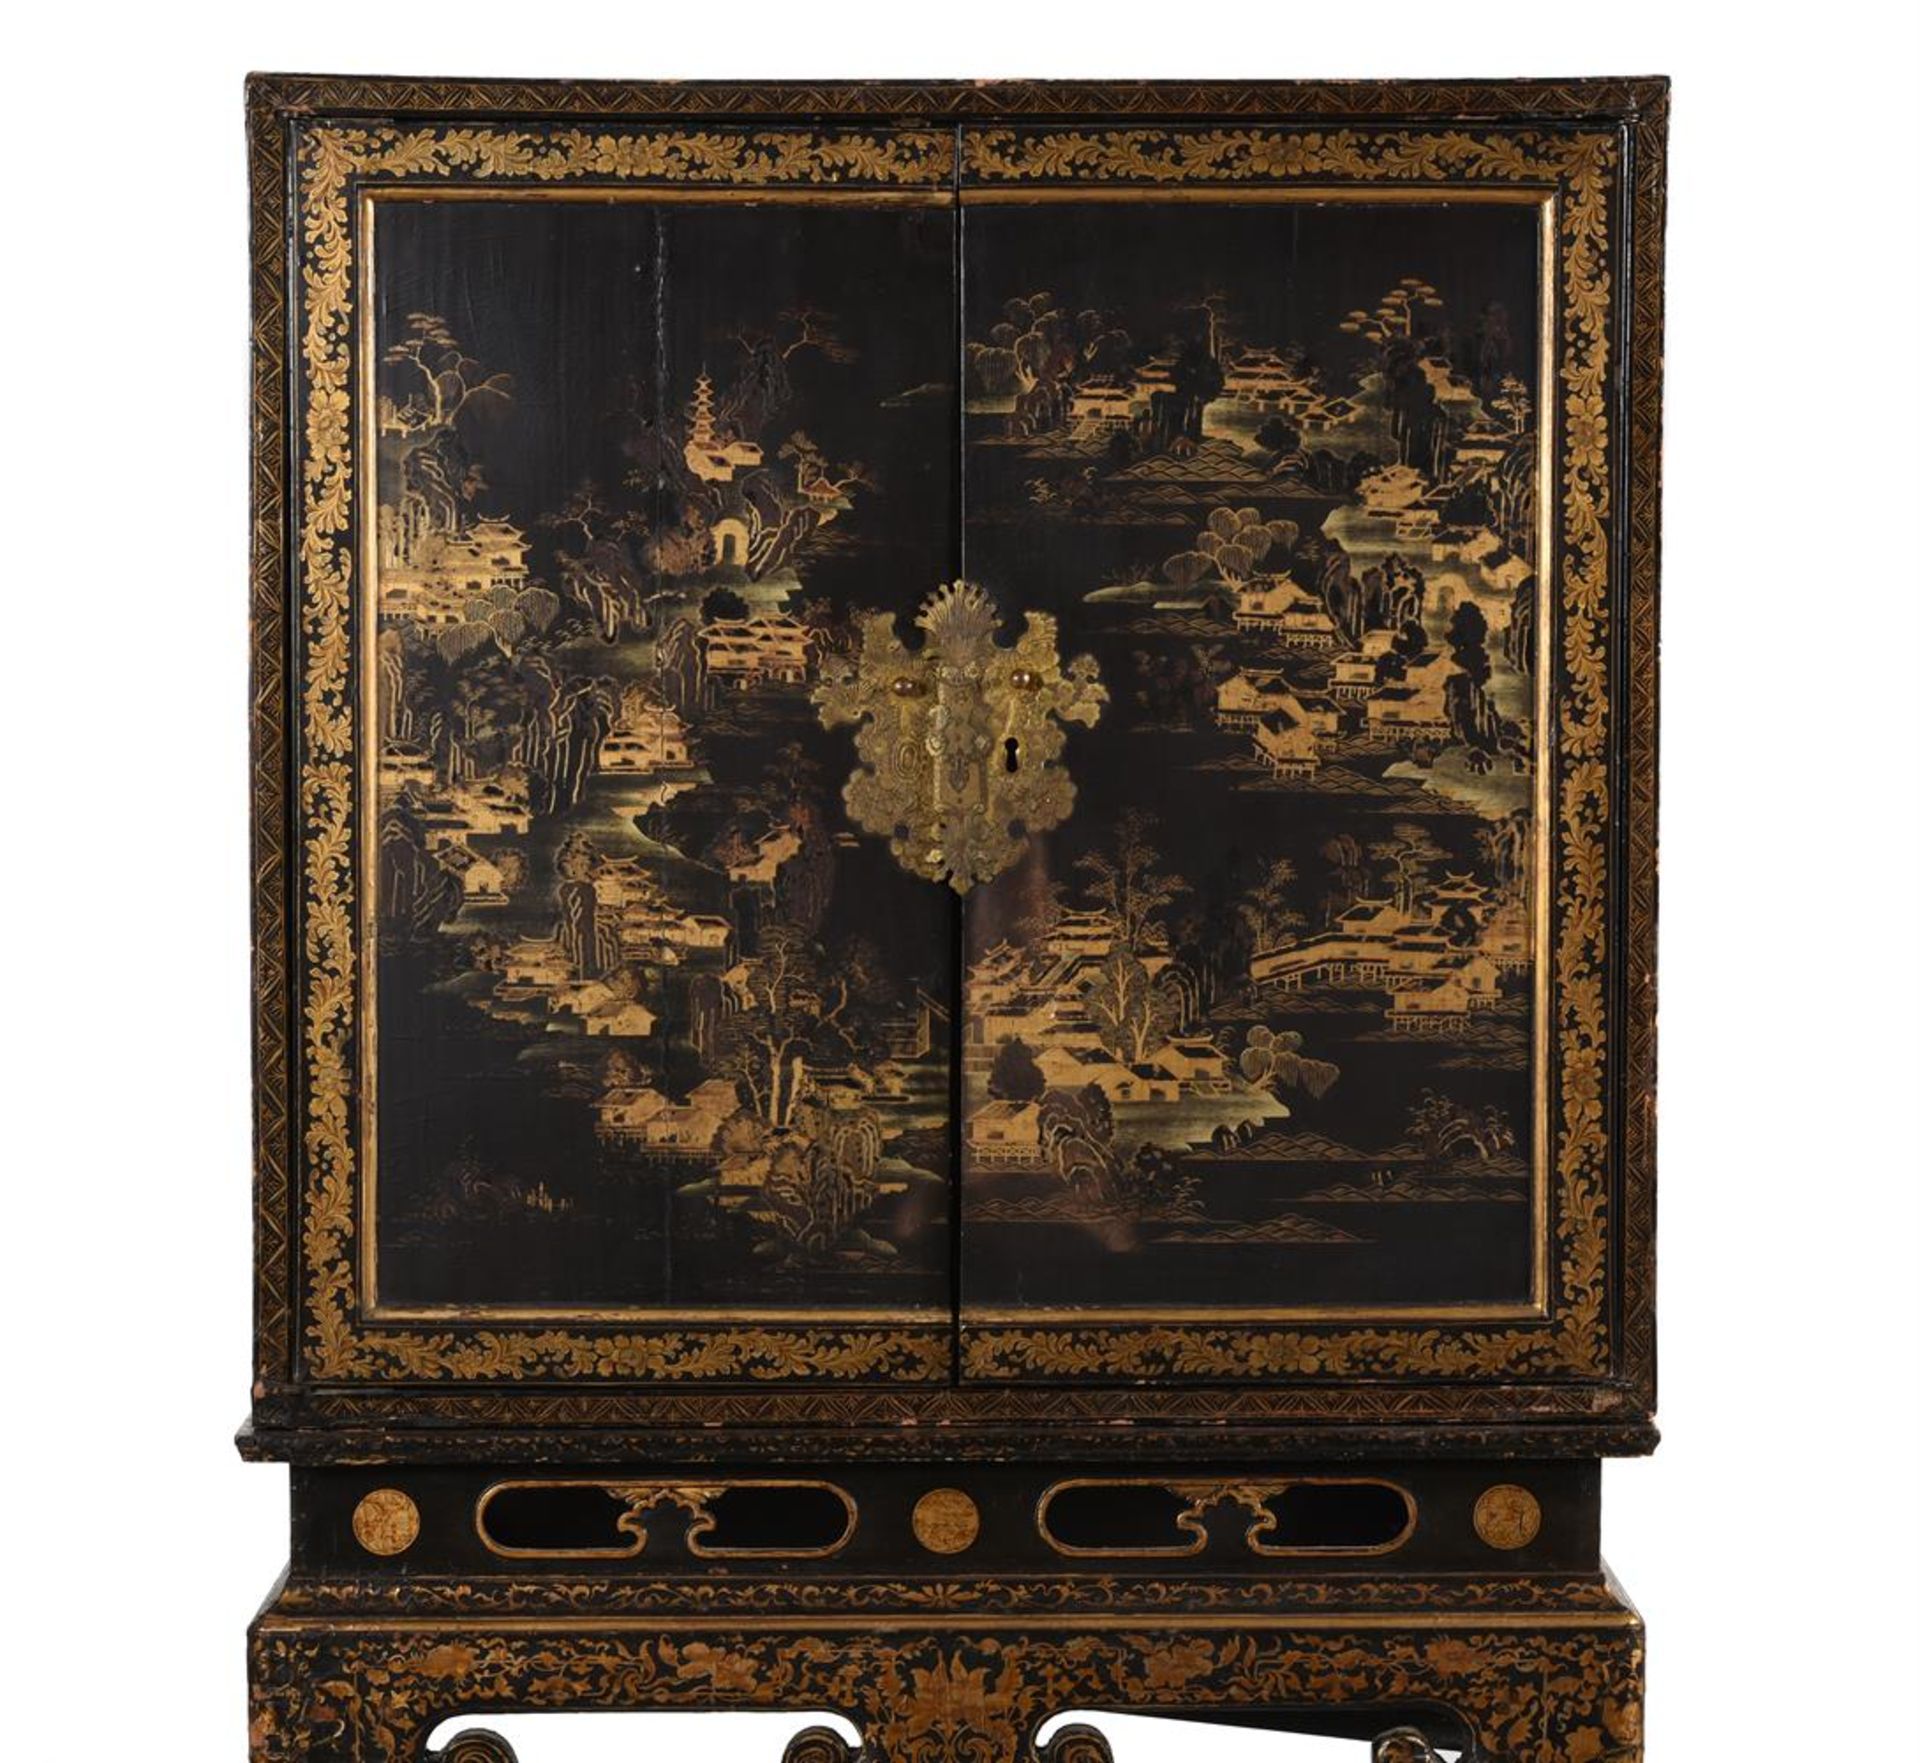 A CHINESE EXPORT LACQUER CABINET ON STAND, LATE 18TH OR EARLY 19TH CENTURY - Bild 2 aus 15